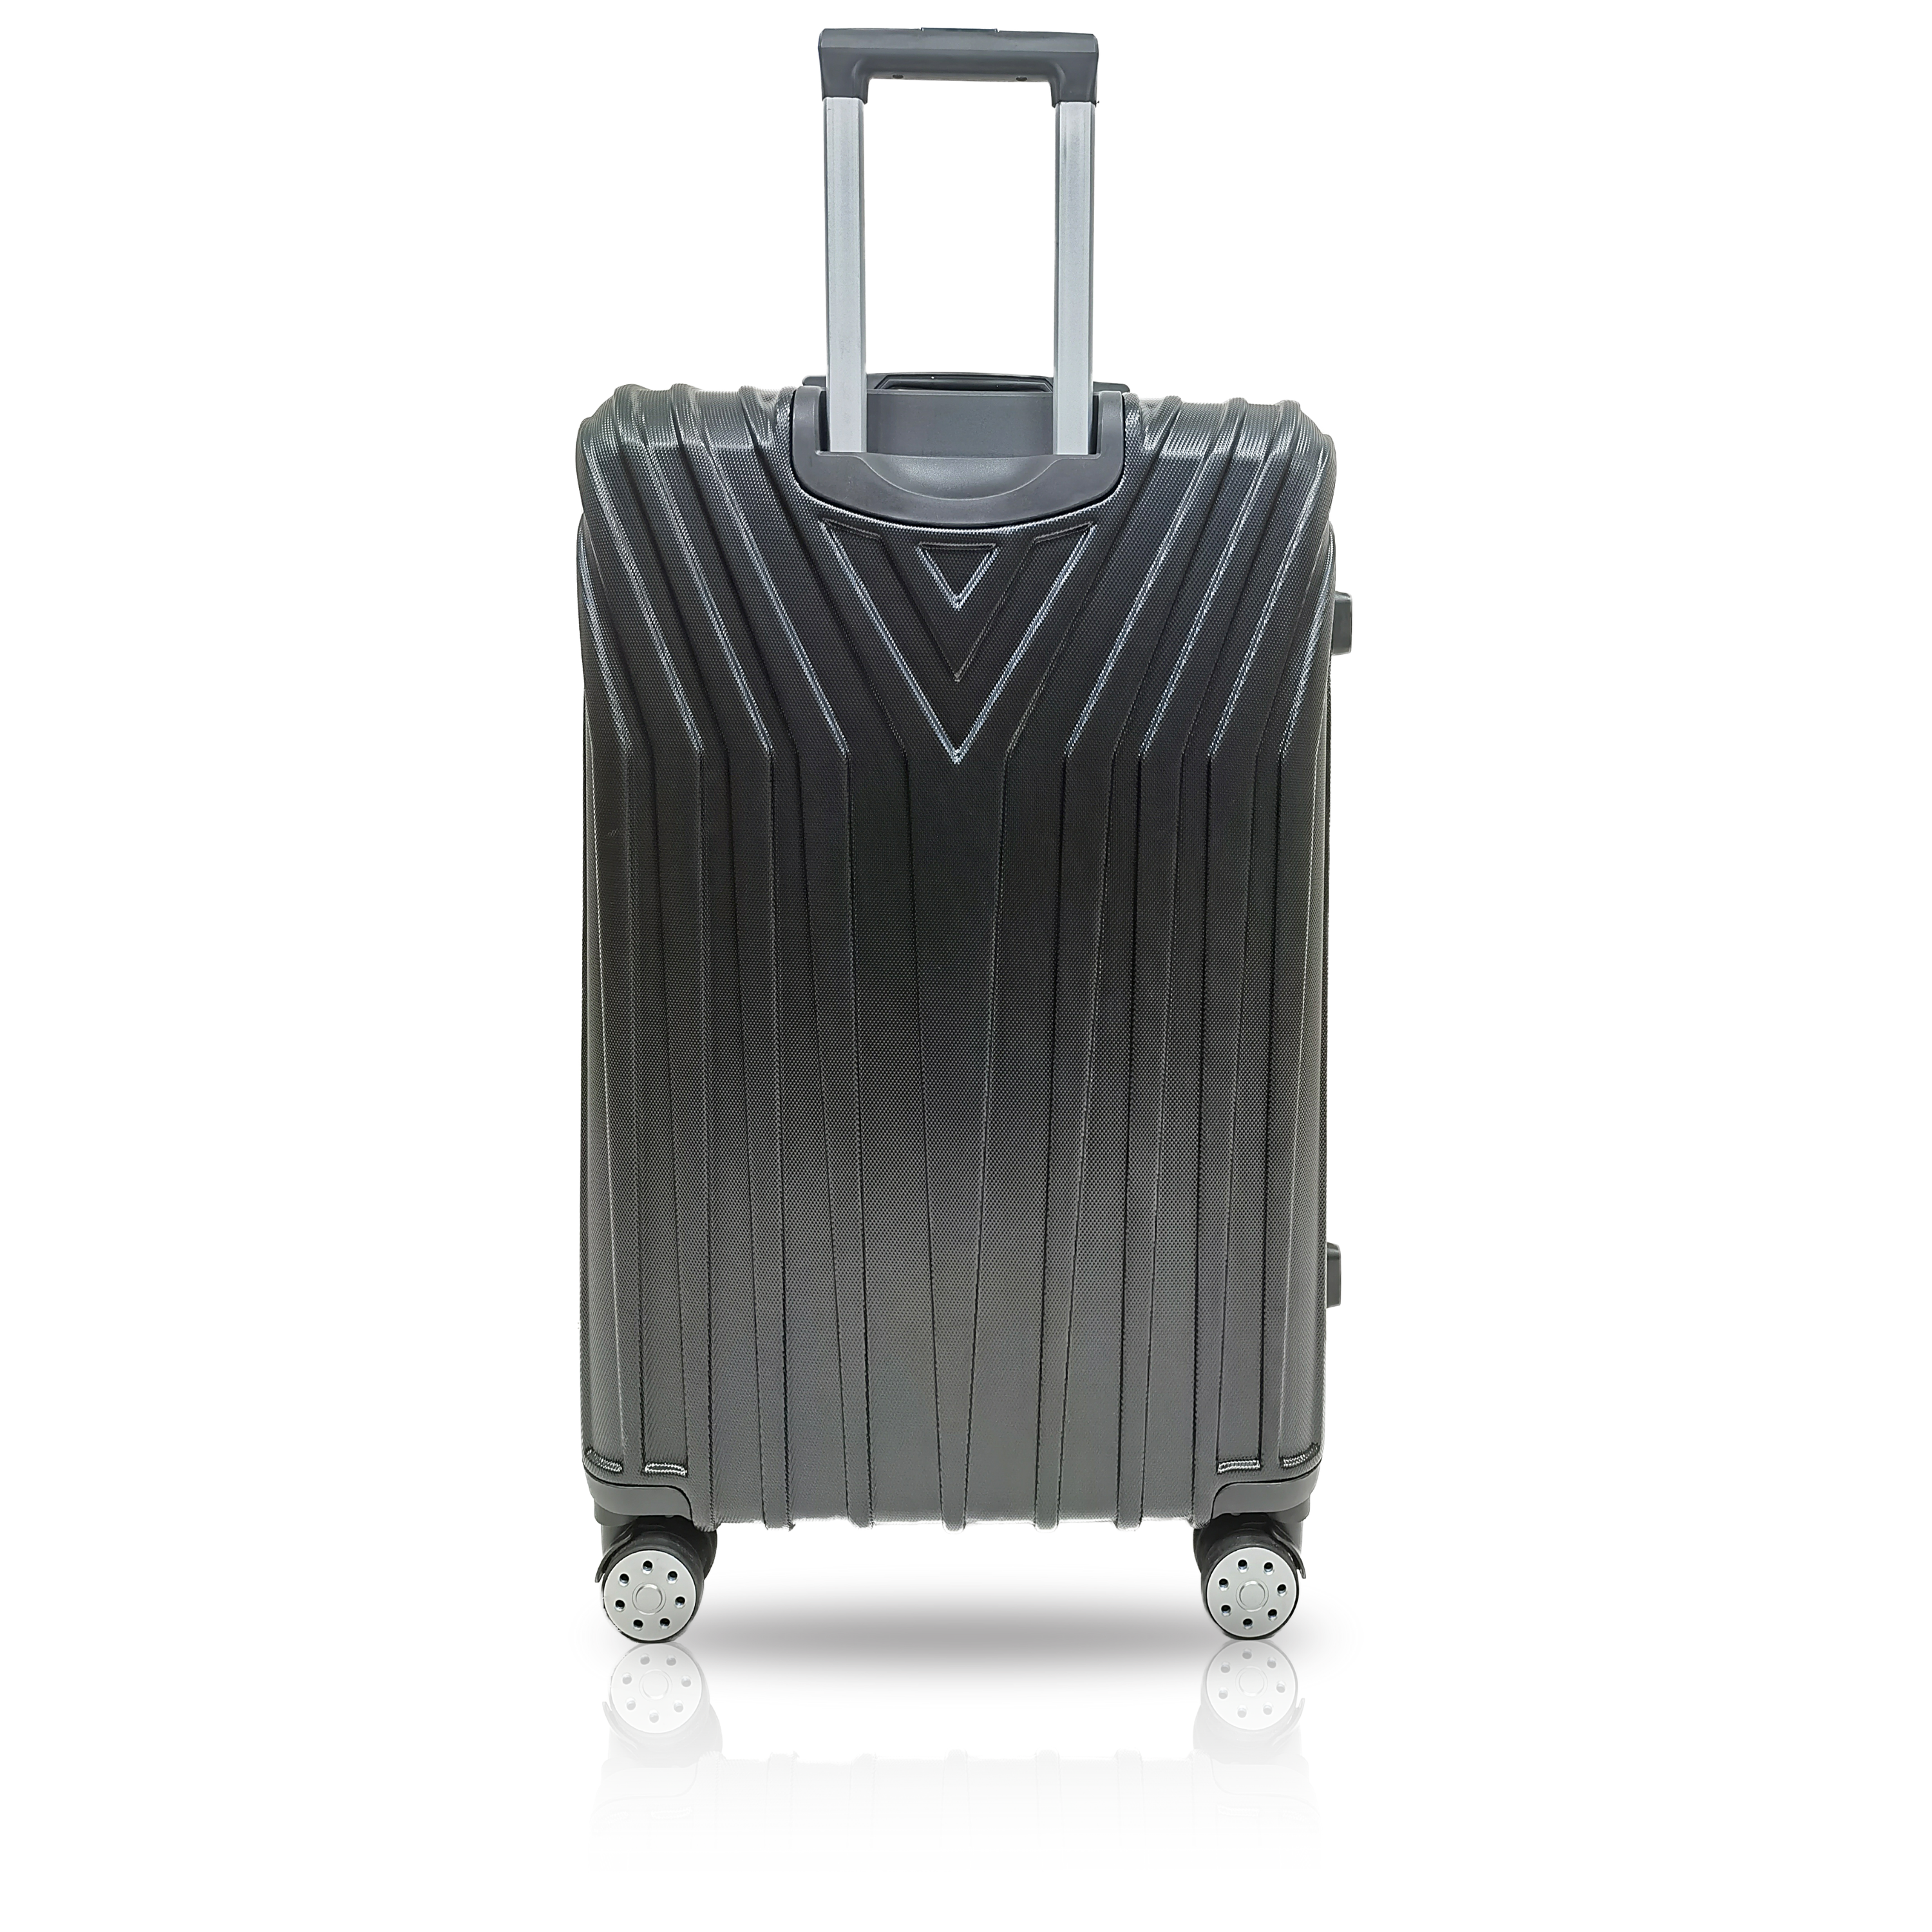 TUCCI BORDO ABS 28" Large Check In Luggage Suitcase